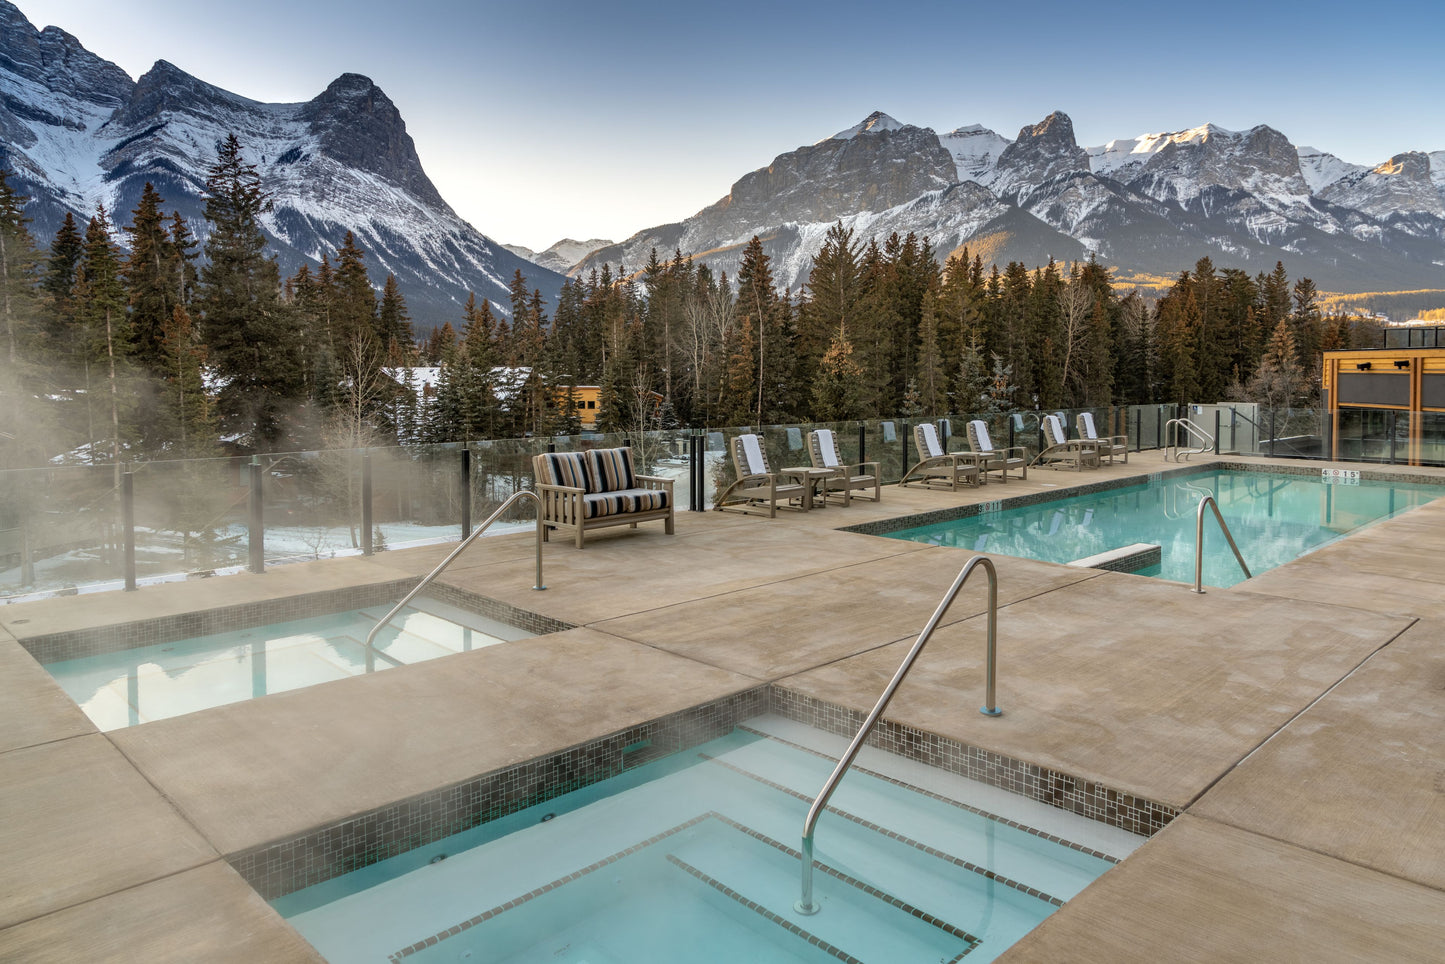 The Malcolm Hotel Review: A Luxurious Retreat in the Alberta Rockies